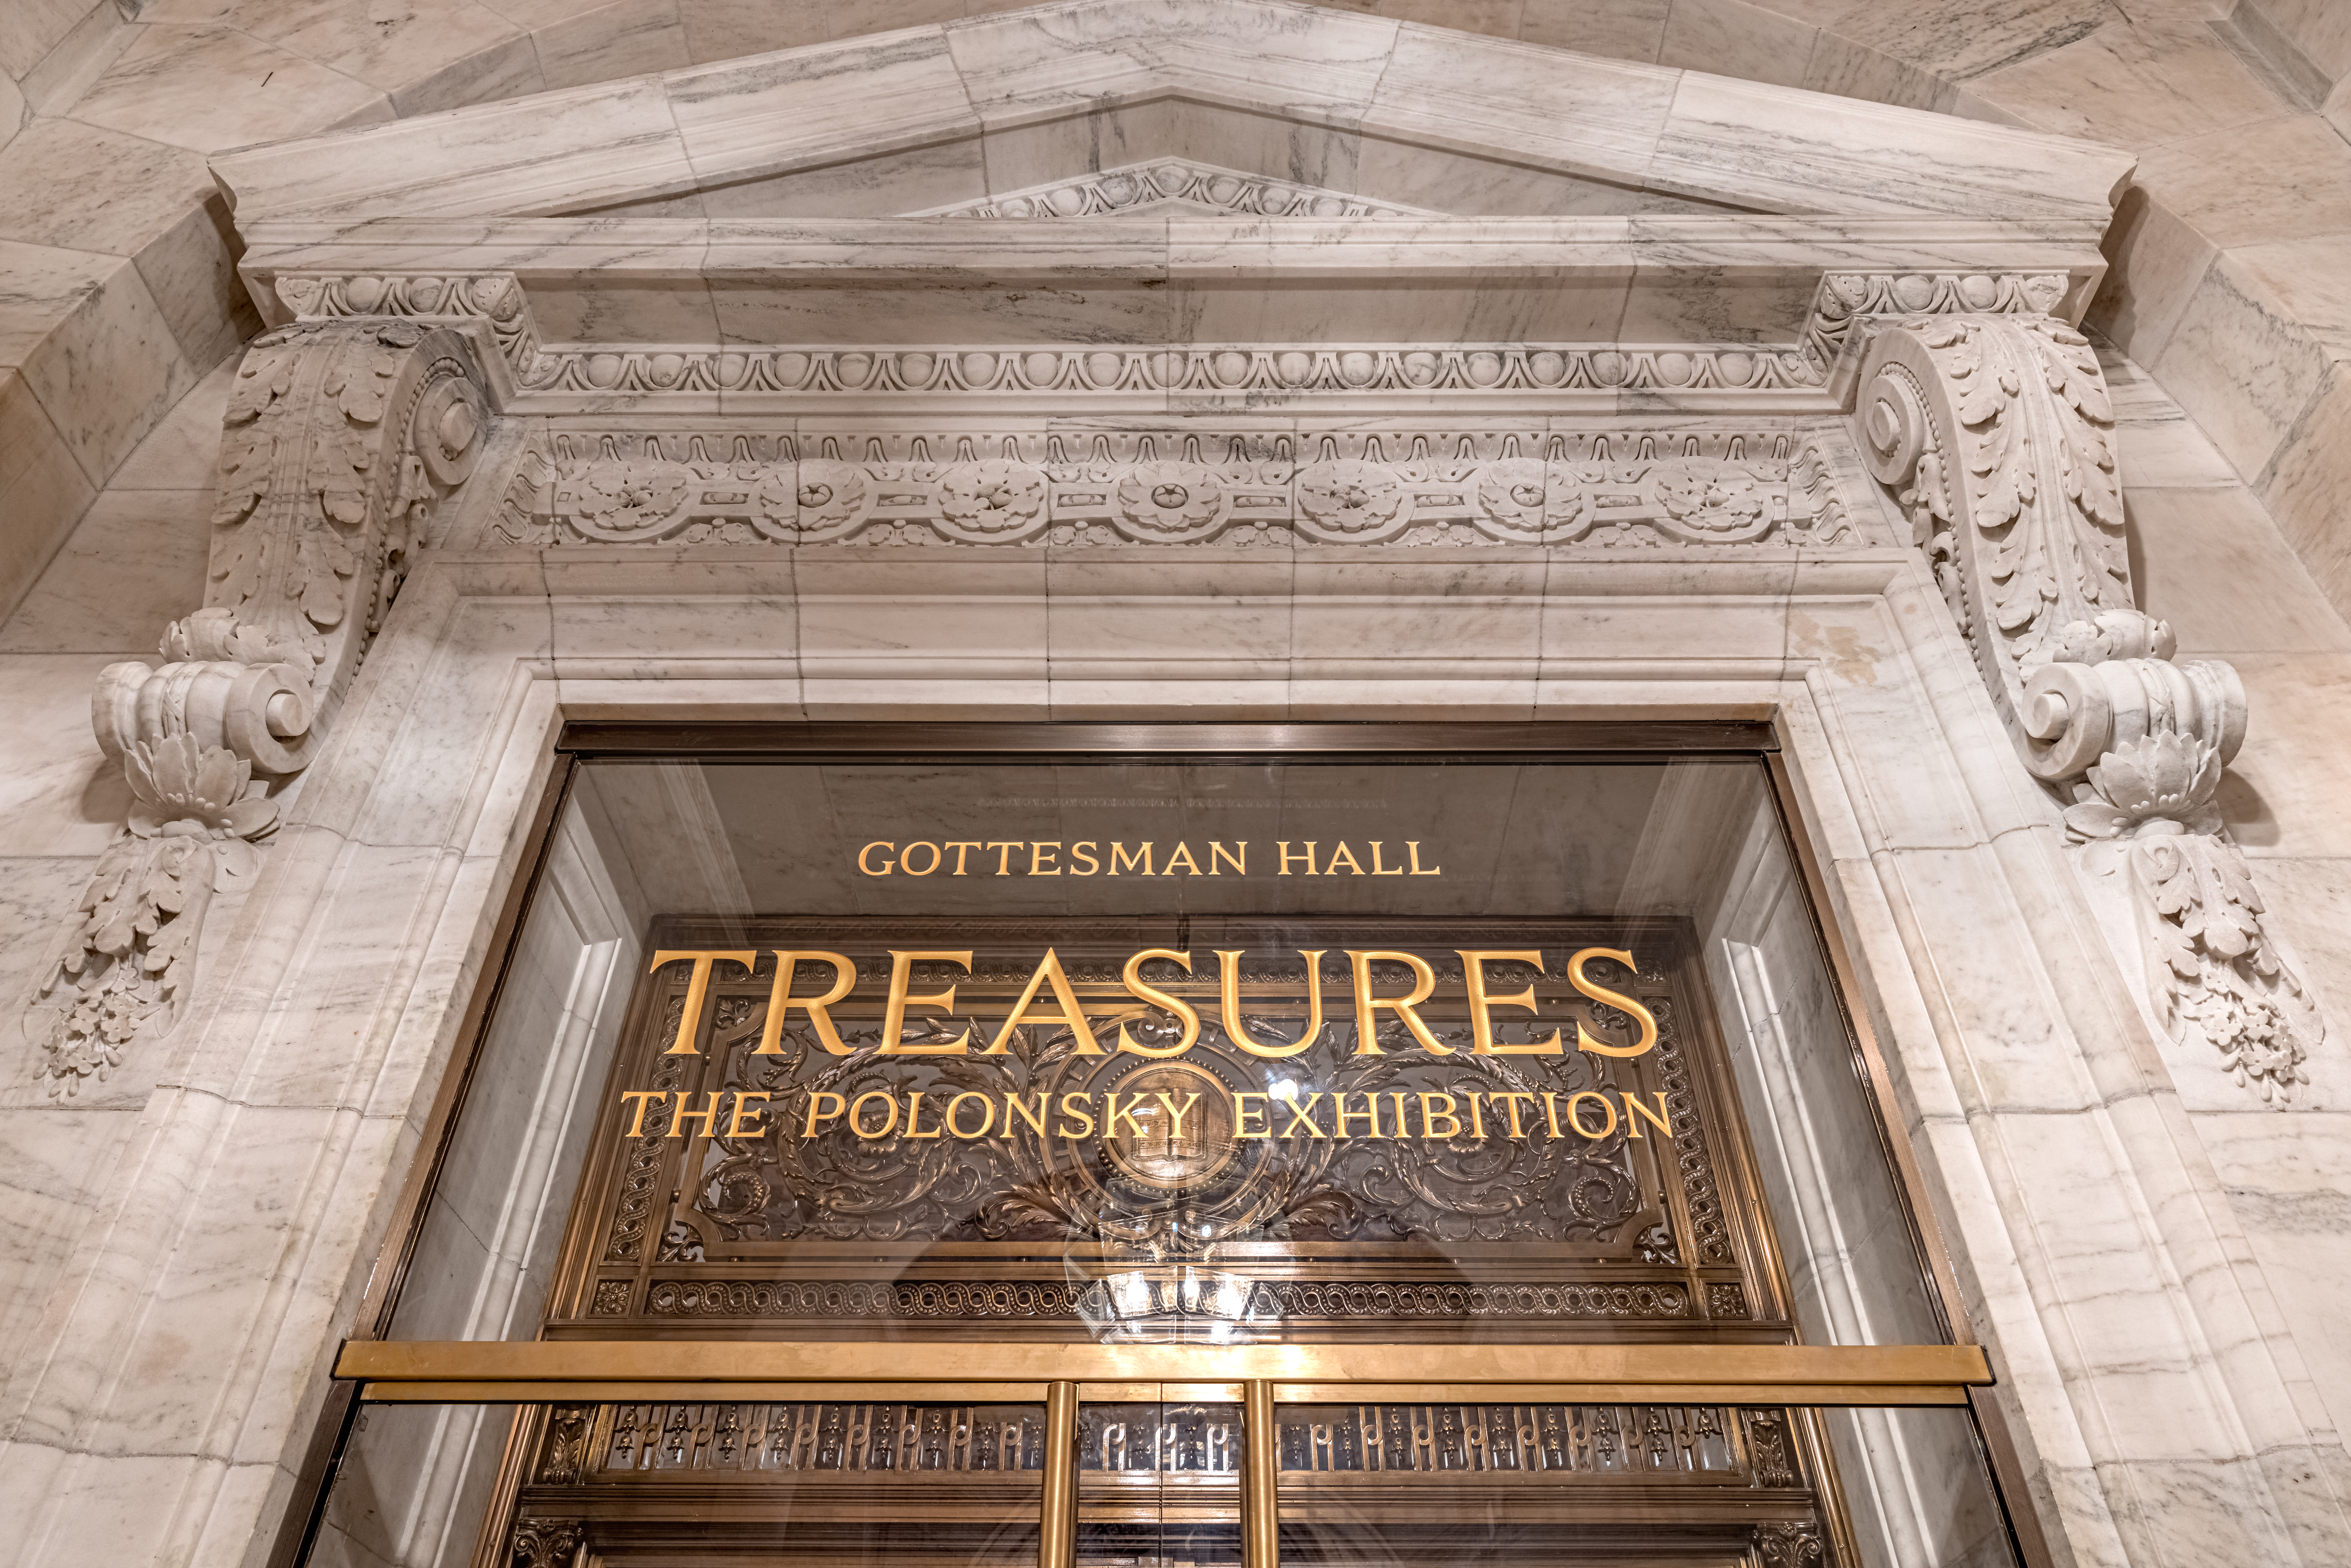 The entrance to the Treasures Exhibit at the New York Public Library’s Gottesman Hall in the Stephen A. Schwarzman Building on 42nd Street in Manhattan.